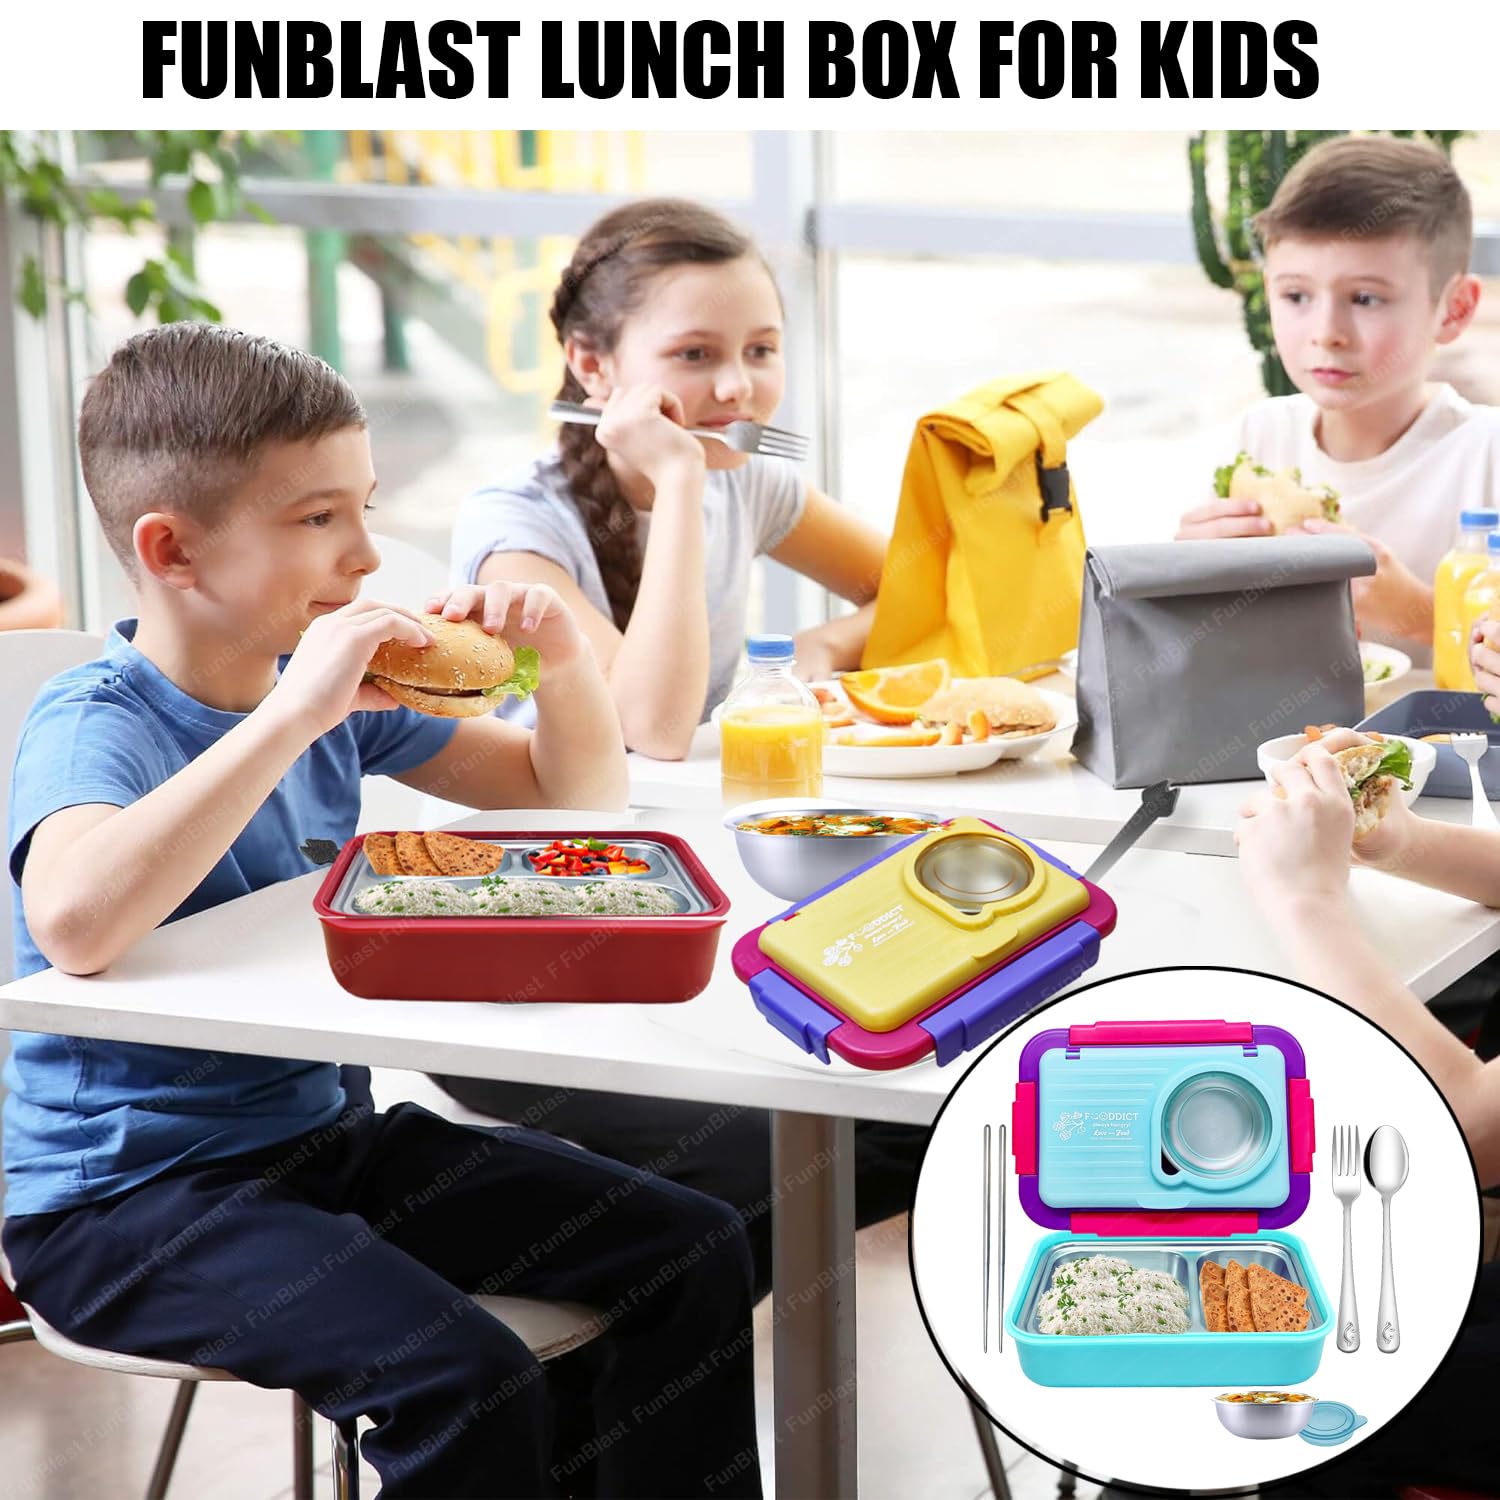 Lunch Box for Kids – Tiffin Box, Stainless Steel Lunch Box, Insulated Bento Lunch Box for Kids, 5 Compartment Lunch Box with Bowl, Spoon, Fork & Chopstick (Blue)